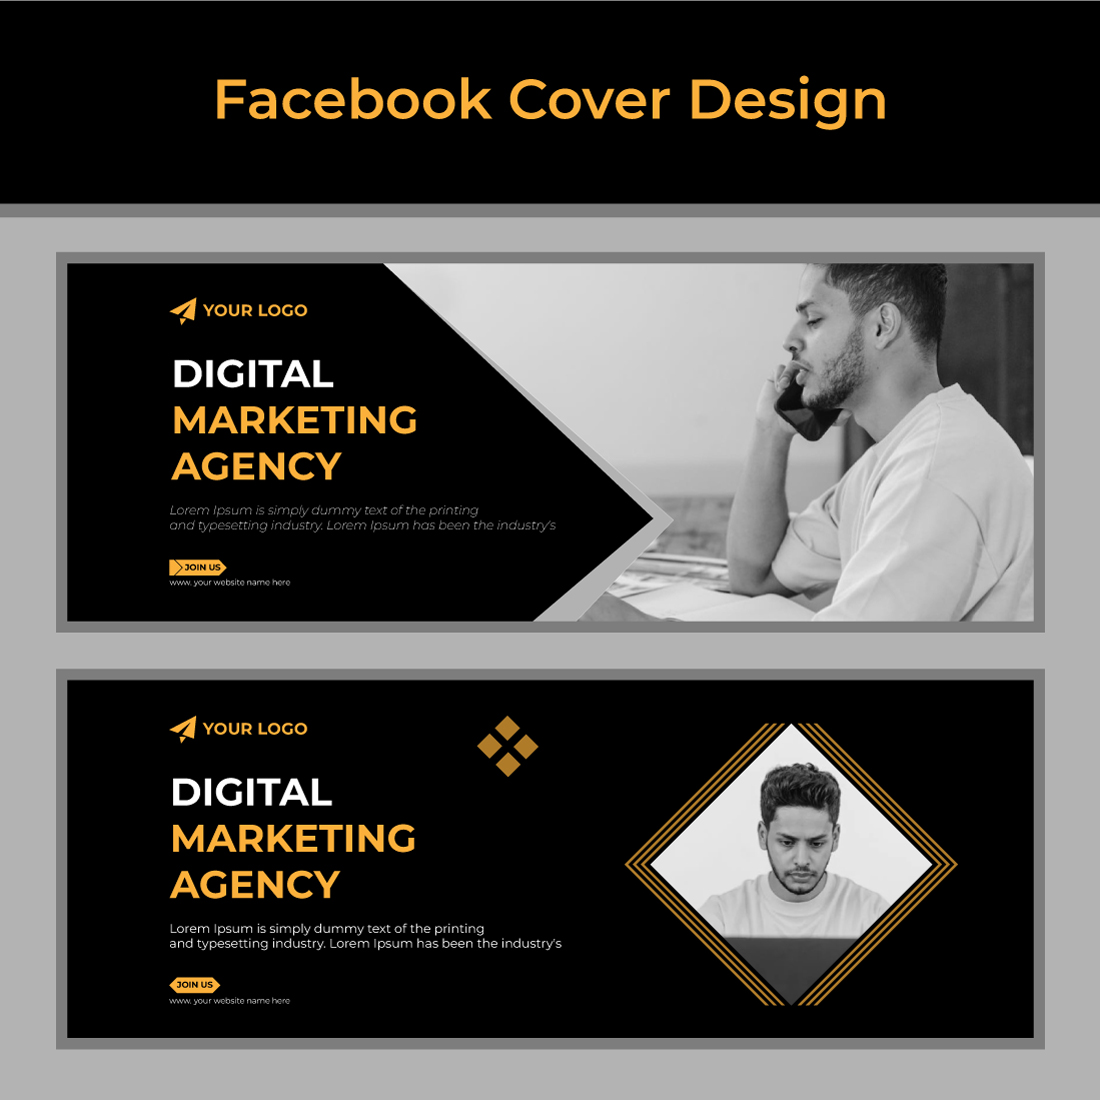 Facebook Cover Design Template cover image.